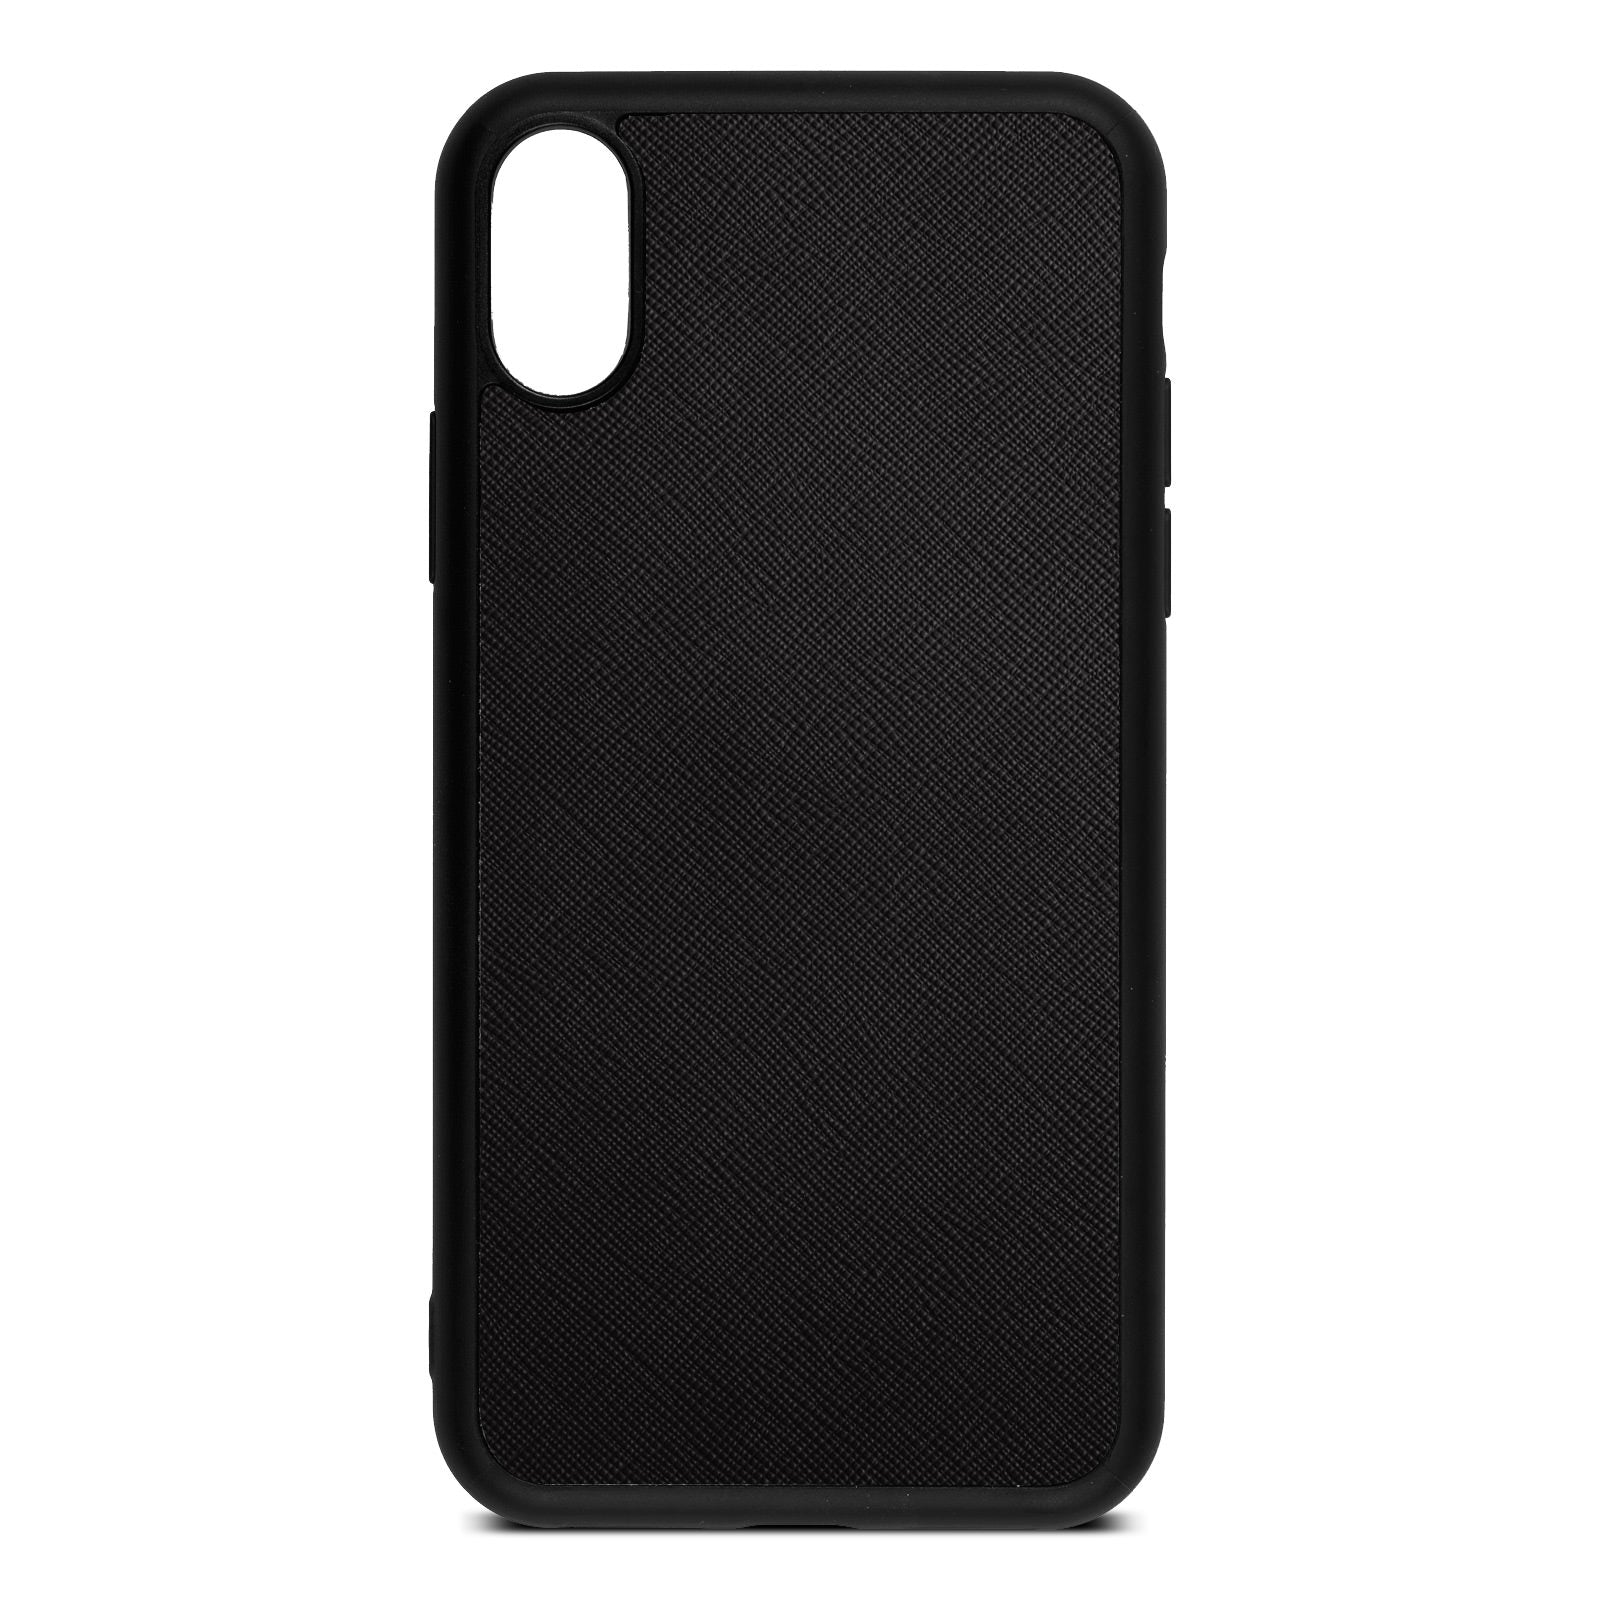 Blank iPhone X Drop Shadow Black Leather Case